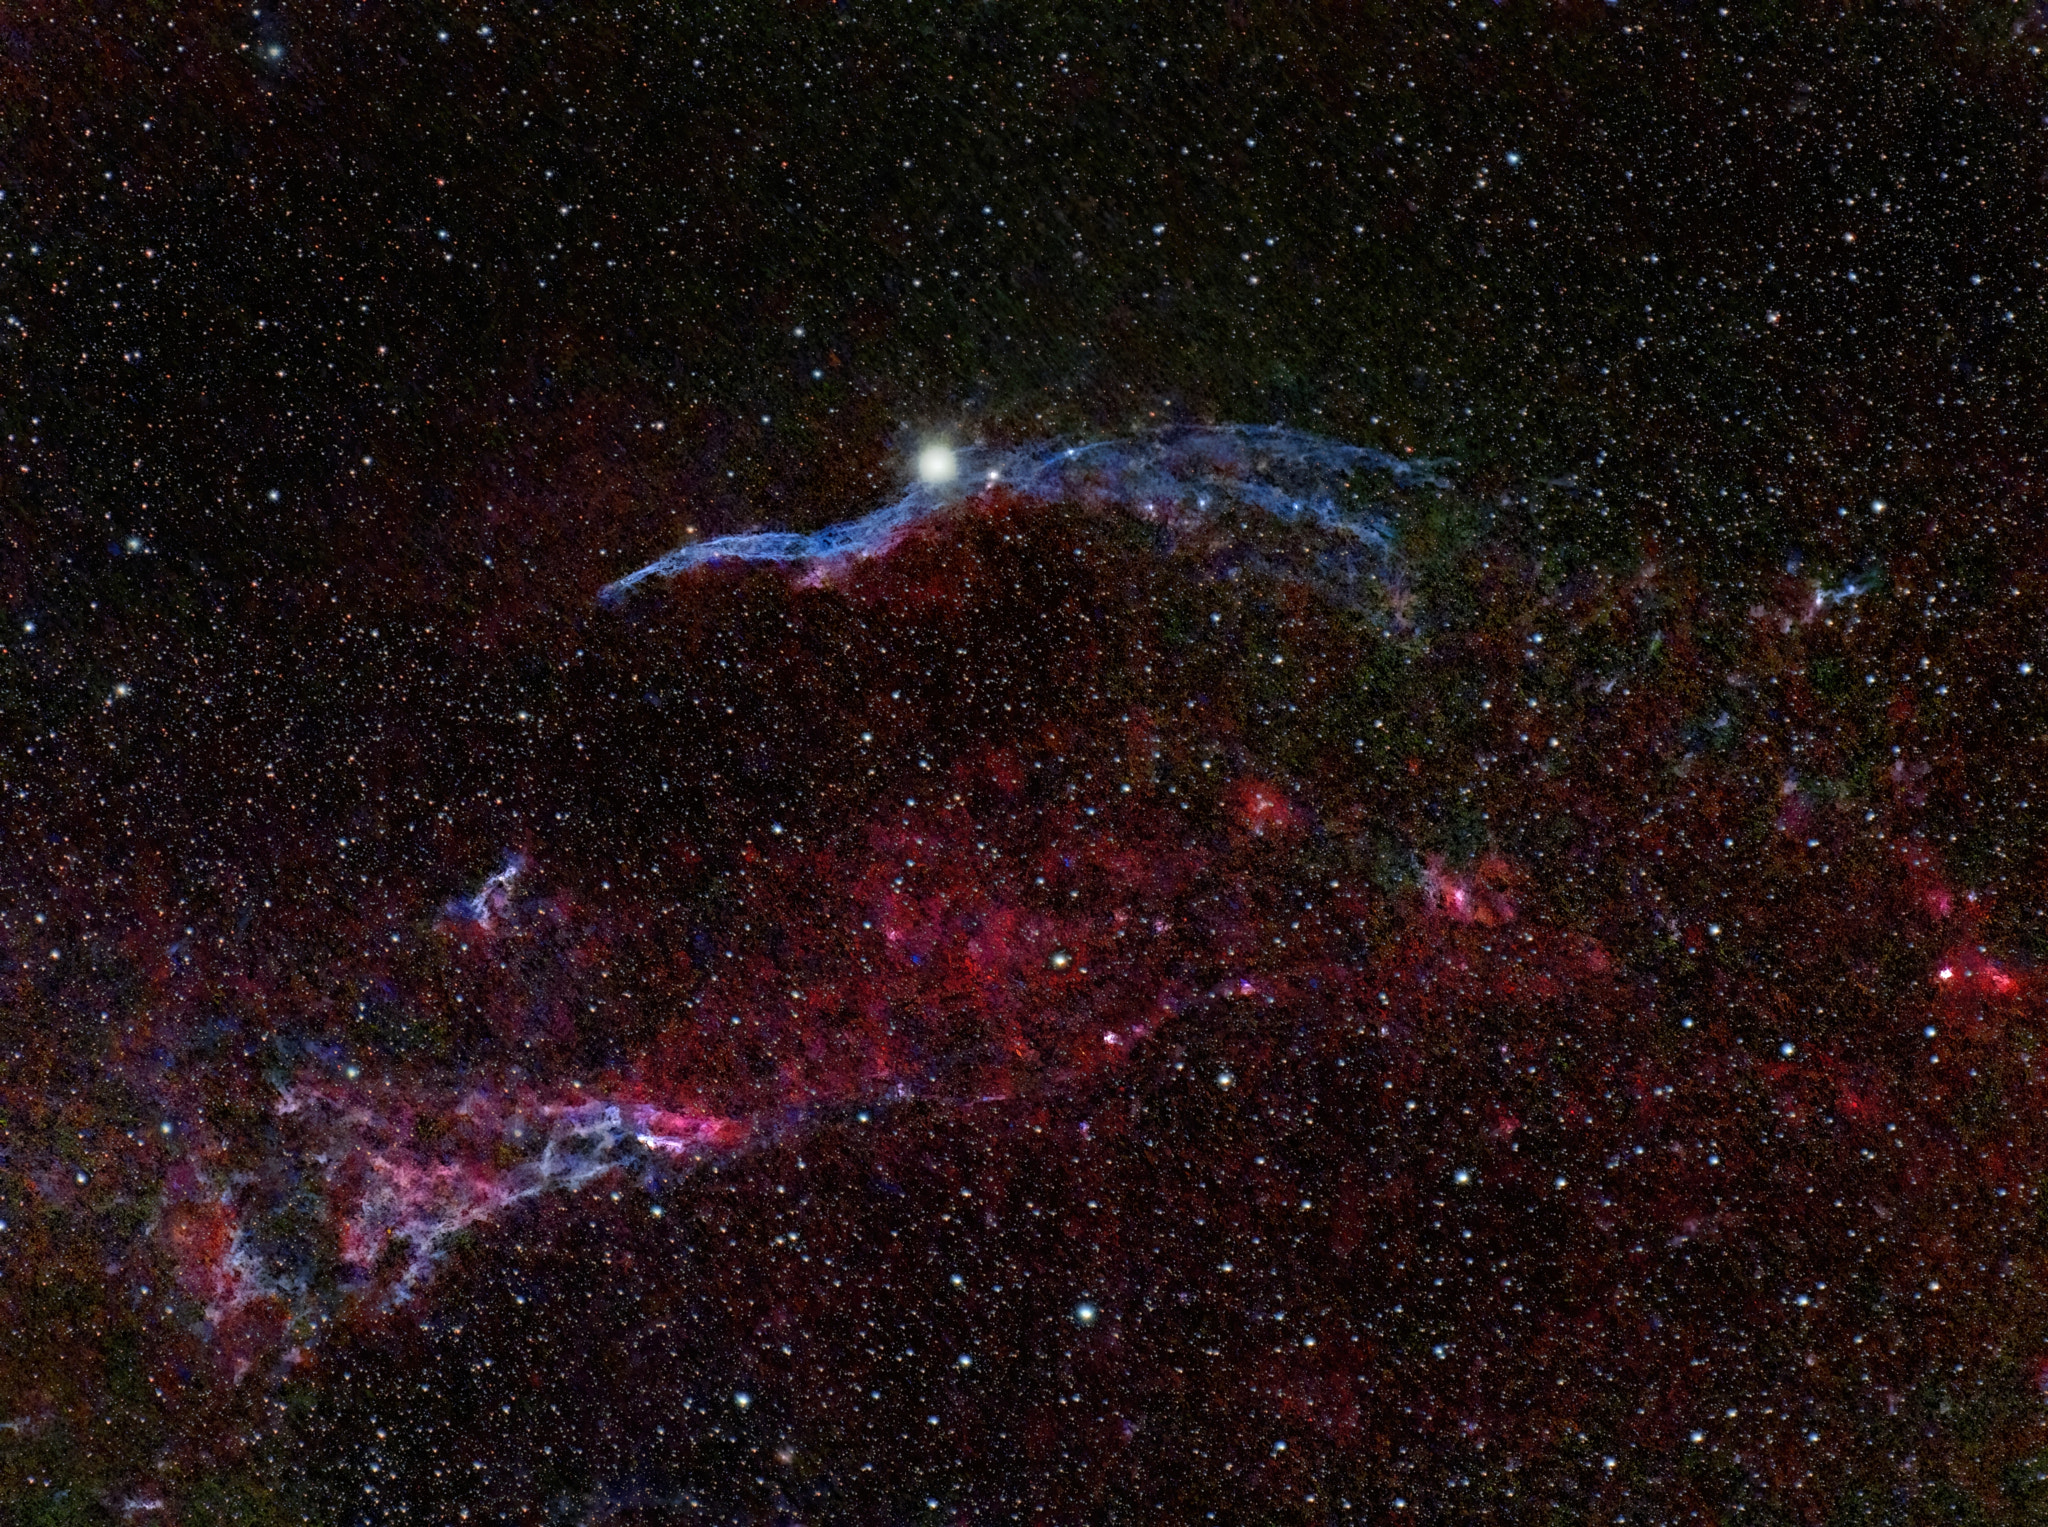 NGC 6960 - The Witch's Broom and Pickering's triangle